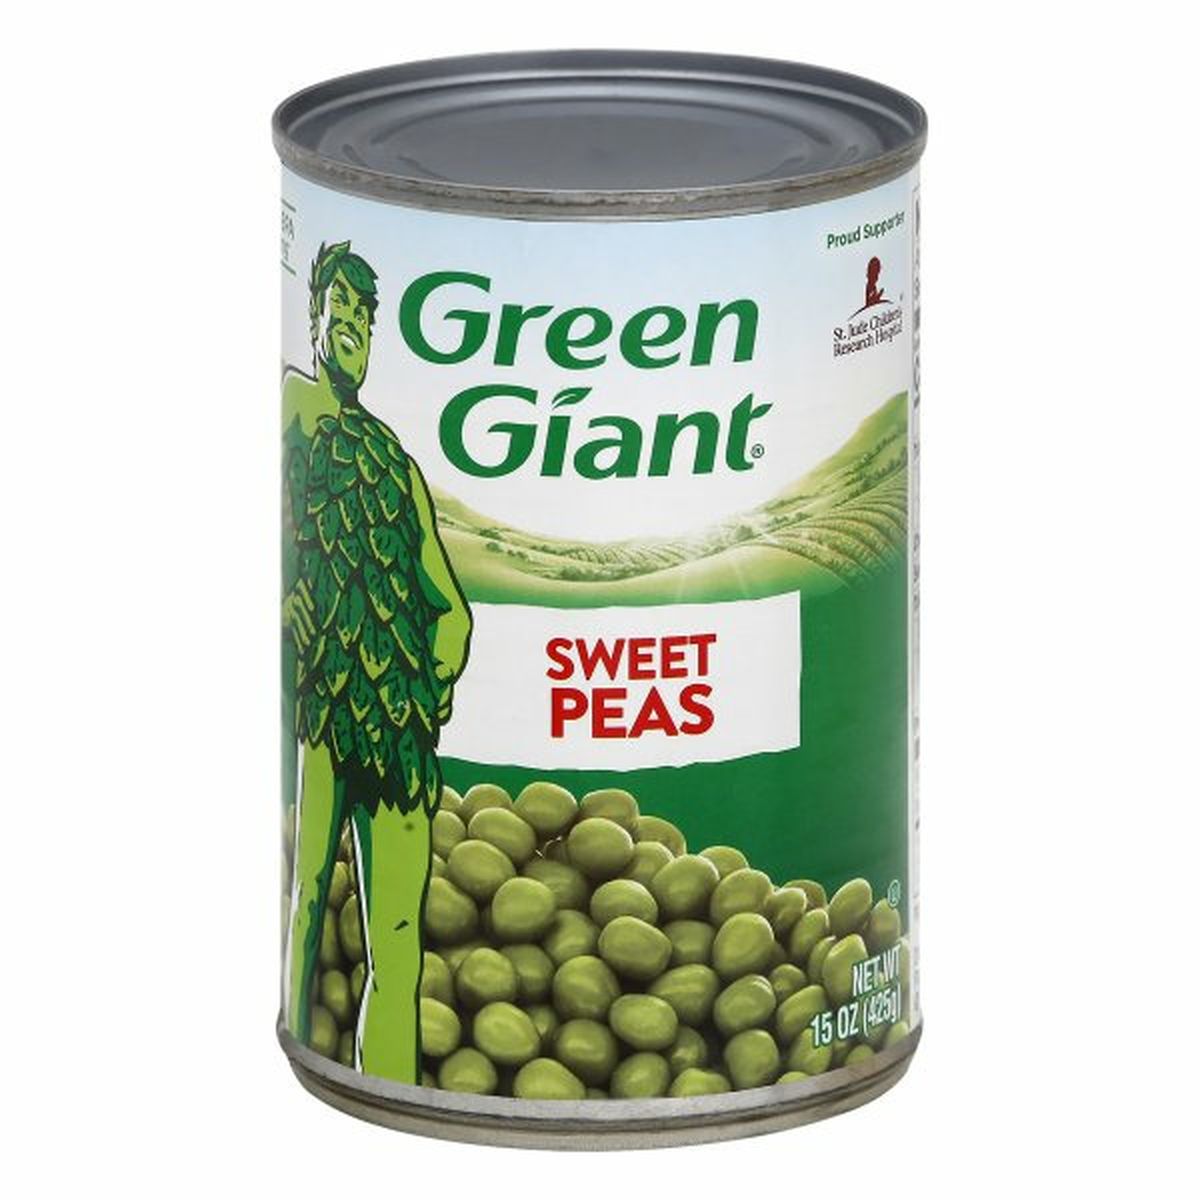 Calories in Green Giant Sweet Peas